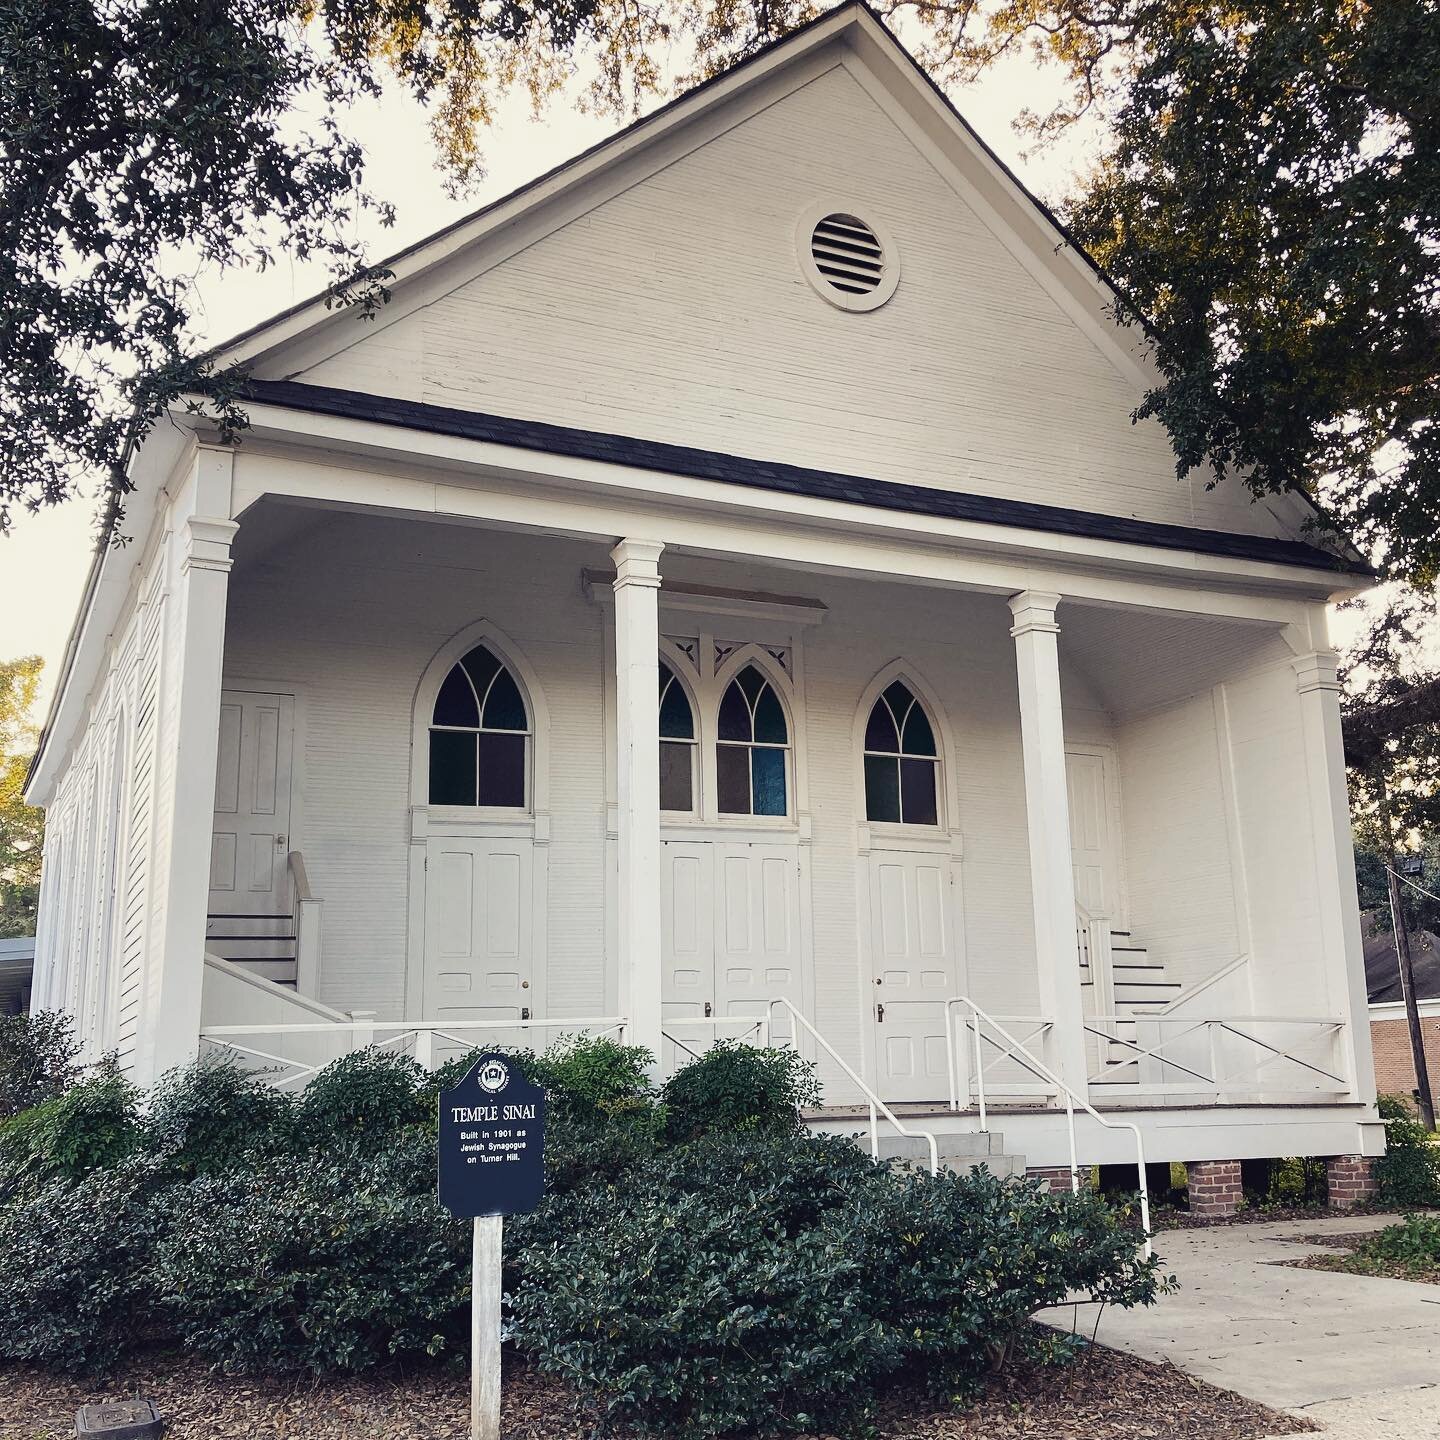 Who knew? Temple Sinai, built in 1901 in St Francisville, LA. I grew up a half hour away and never heard there&rsquo;d ever been a Jewish community here.